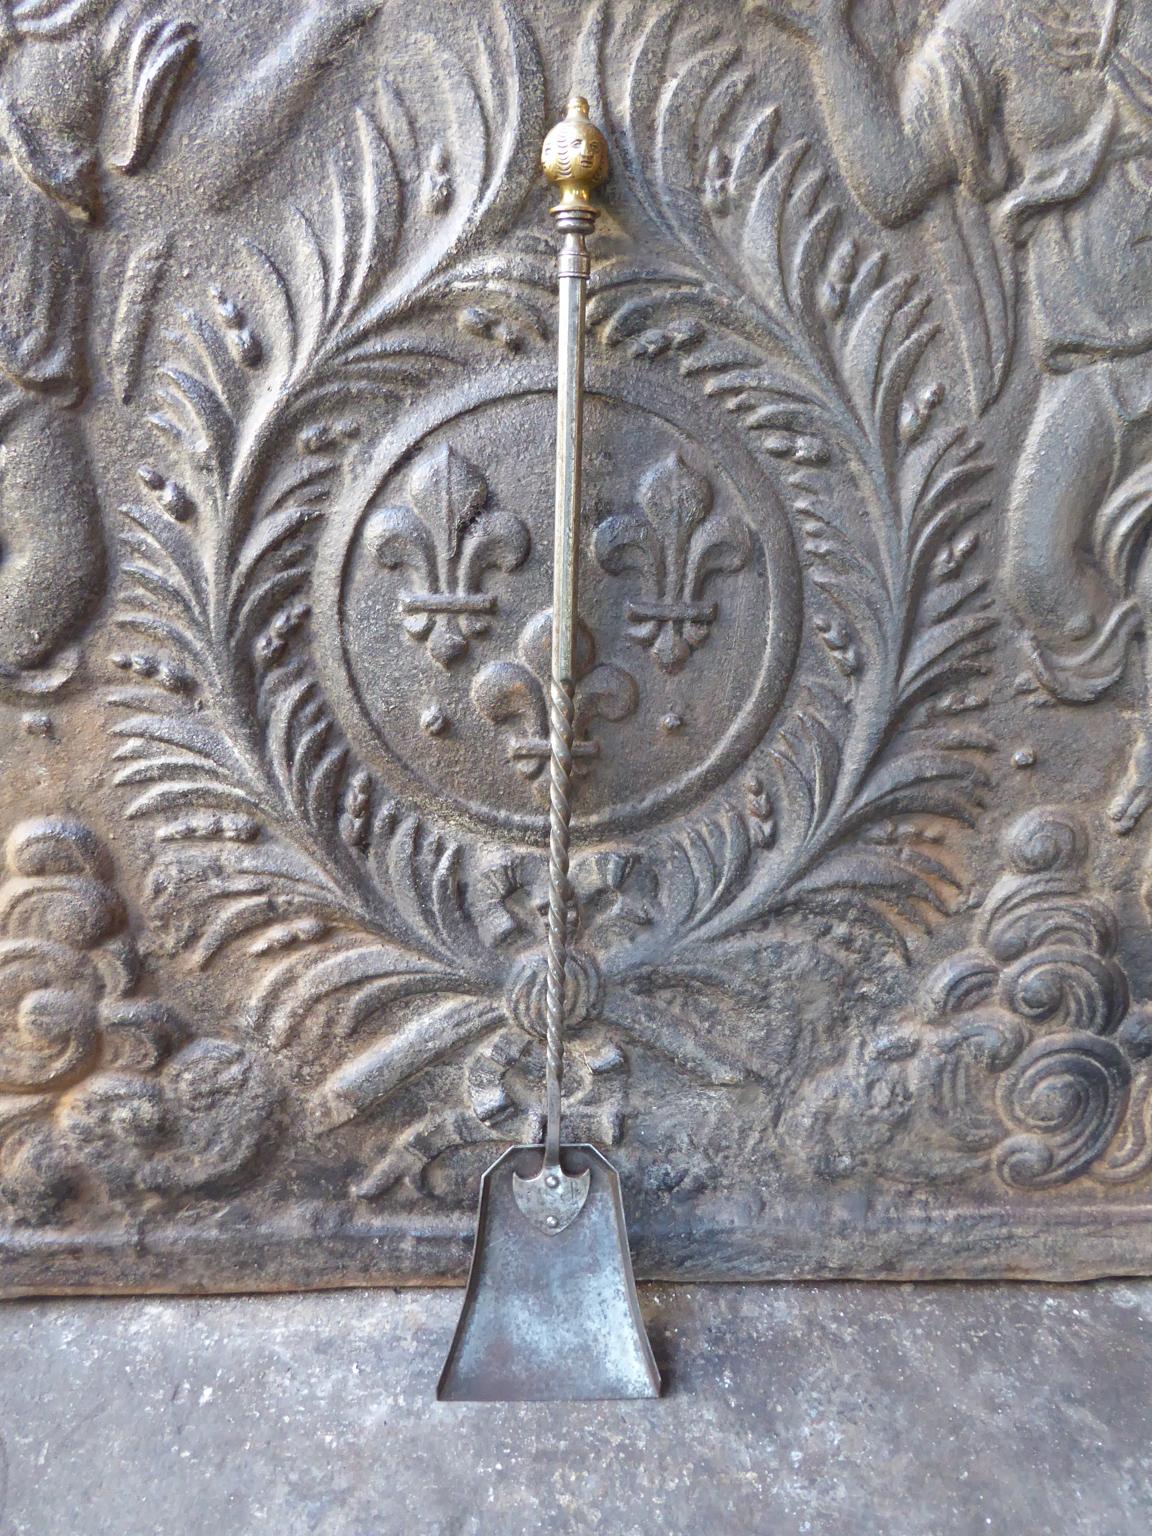 18th - 19th century French neoclassical fireplace shovel made of polished steel. The shovel is in a good condition and is fully functional.